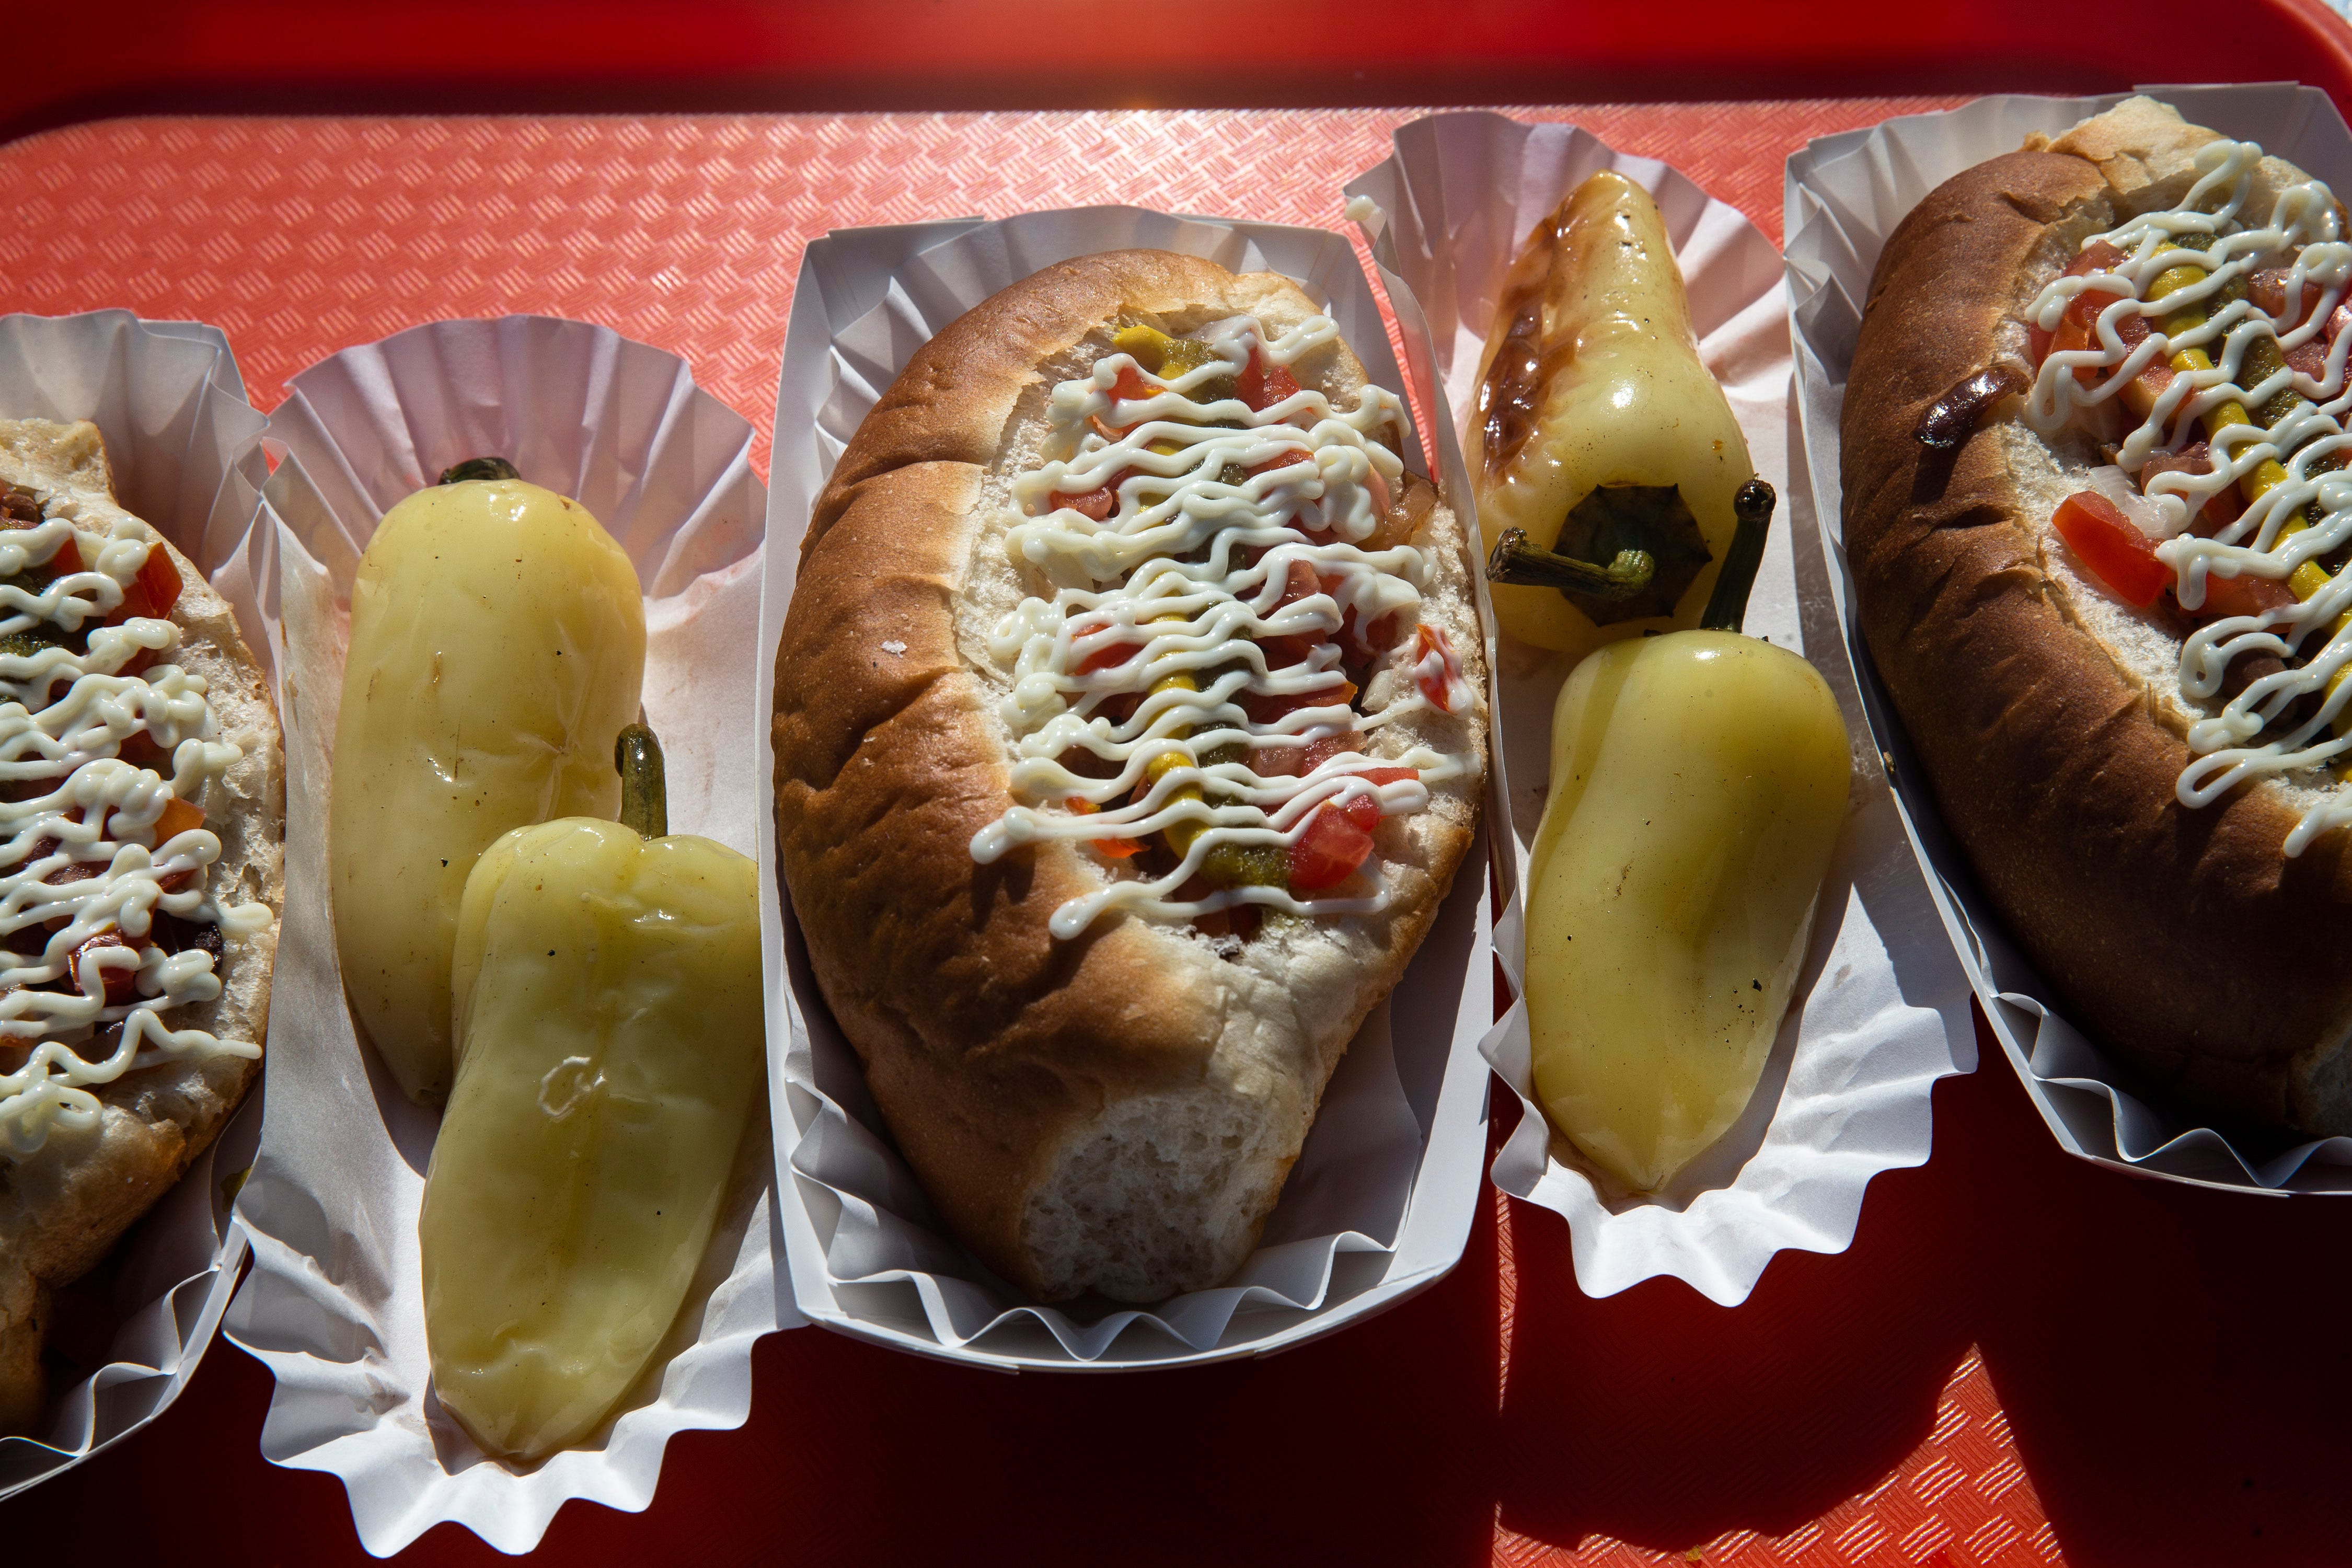 Details of the Sonoran Dog, the main dish of El GŸero Canelo, a Mexican restaurant in Tucson, AZ, August 5, 2021.